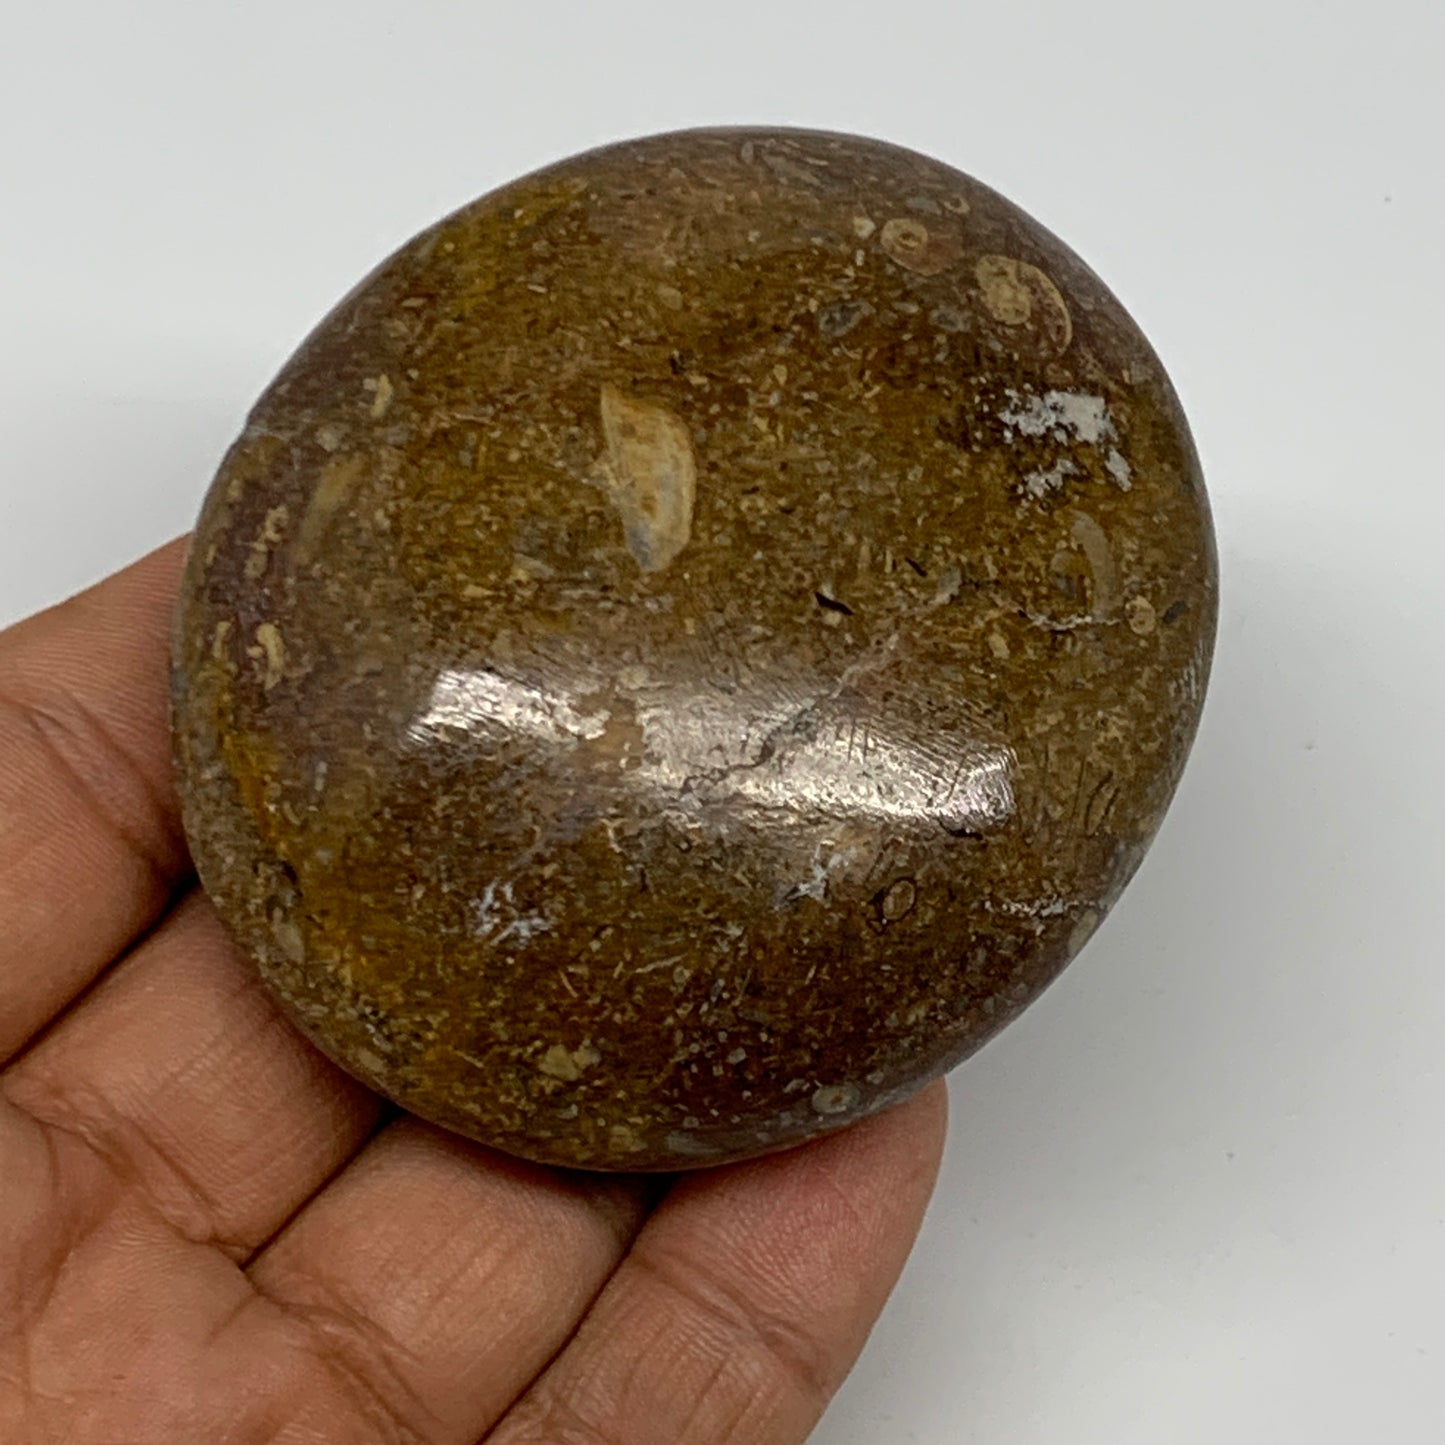 126.6g,2.7"x2.3"x 0.9", Coral Fossils Palm-Stone Polished from Morocco, B20357